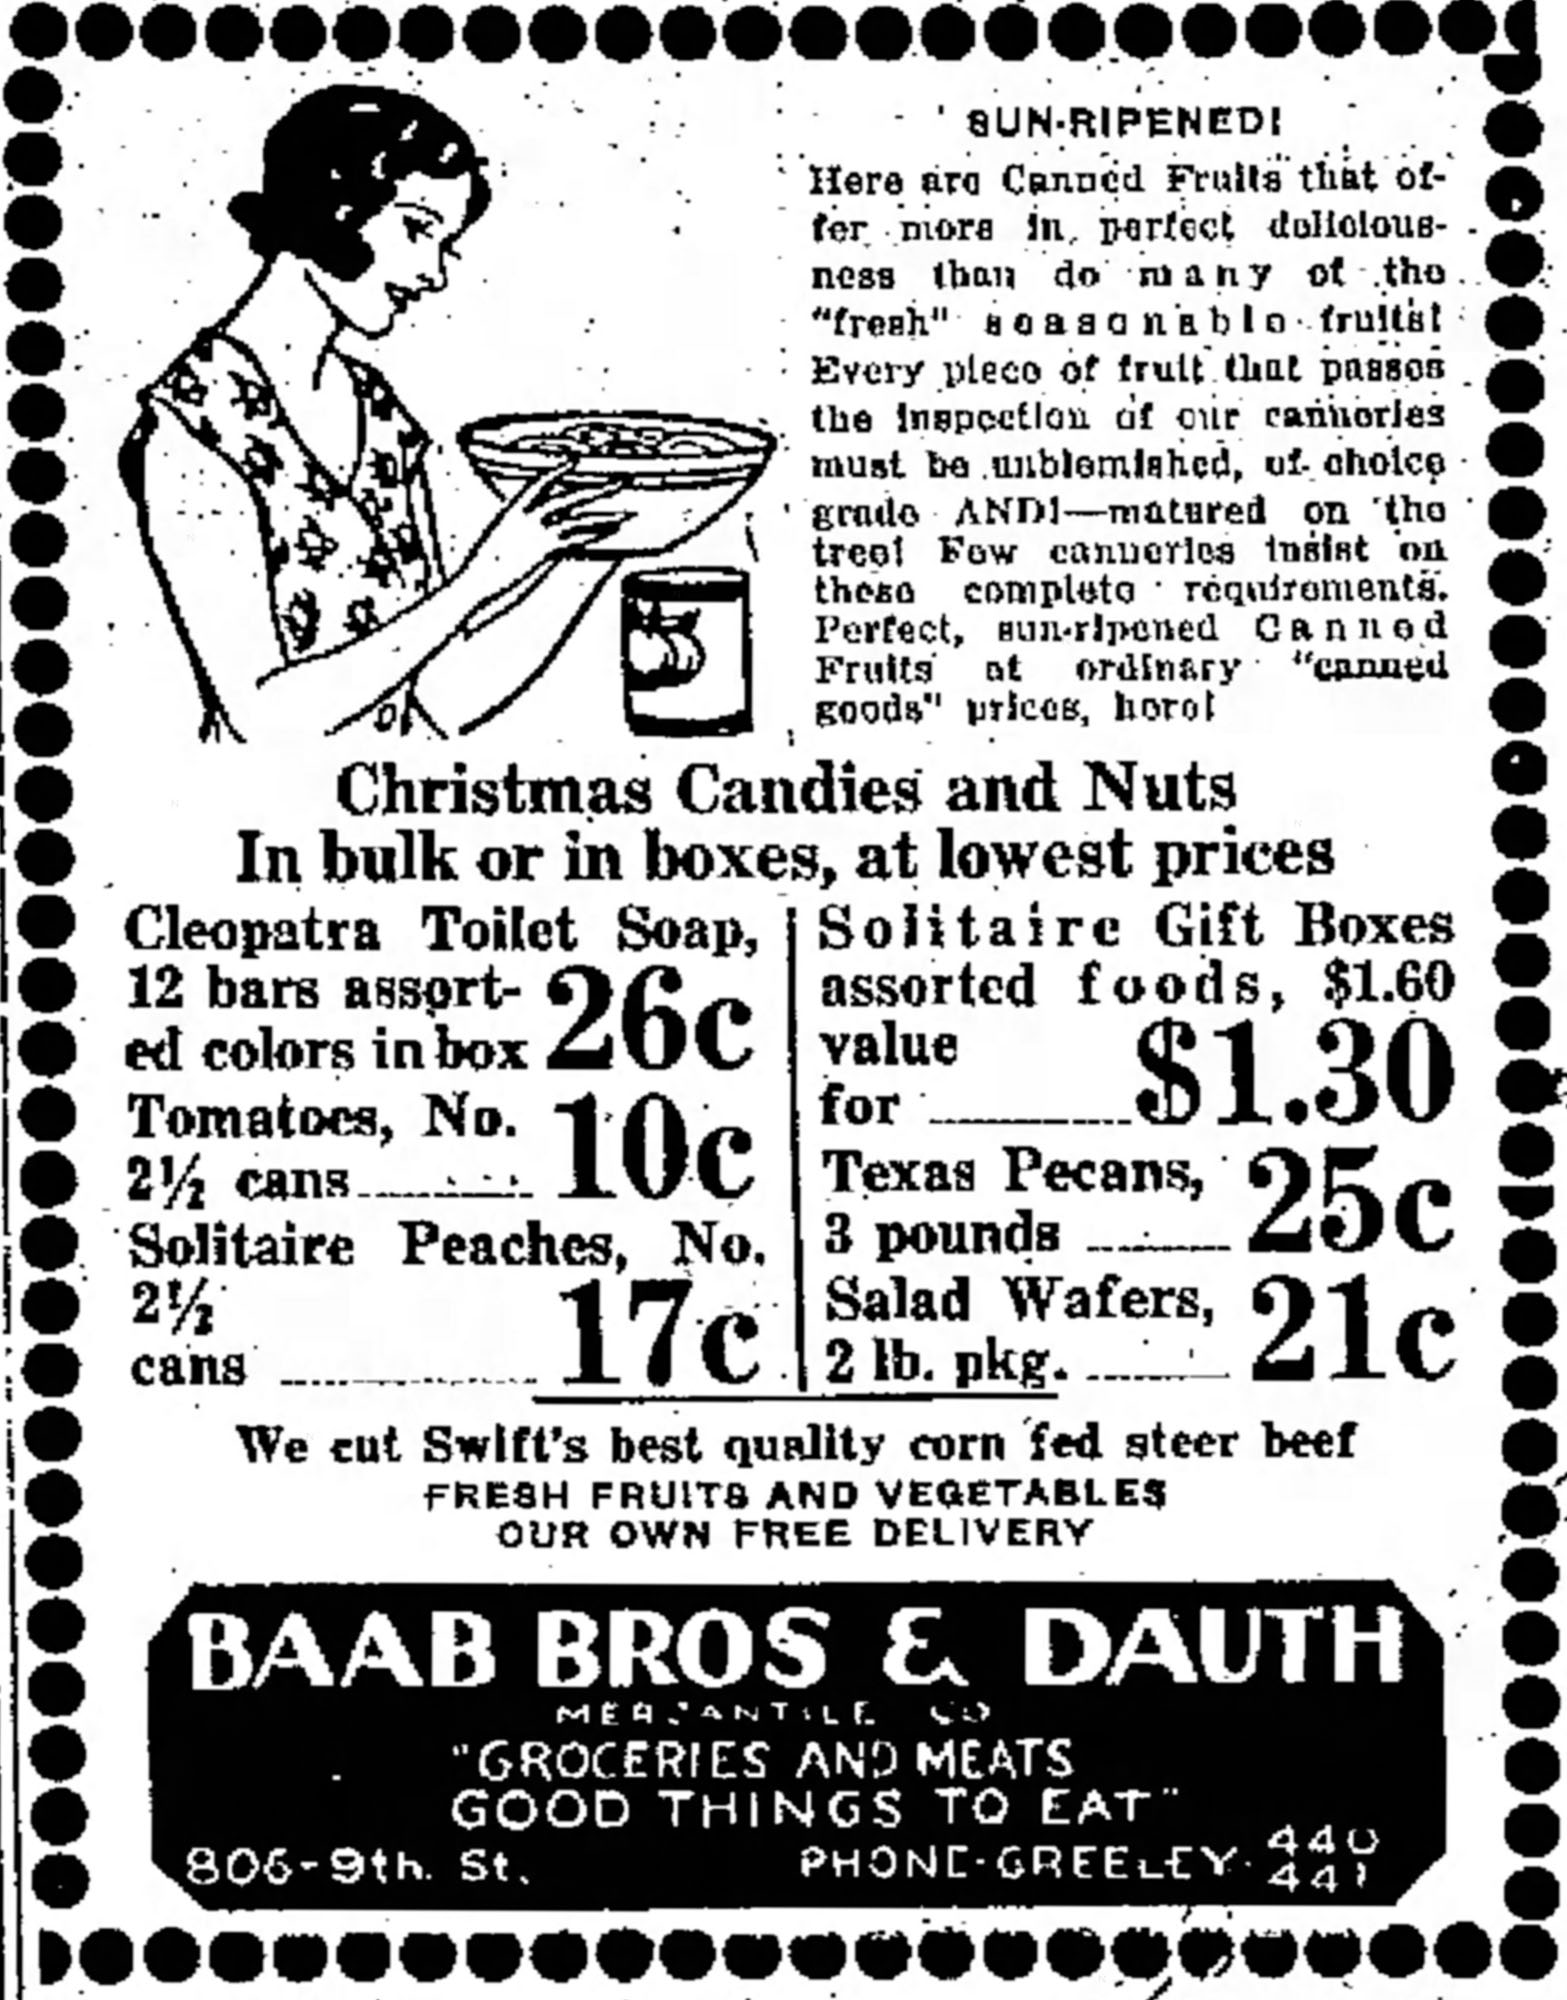 Dauth Family Archive - 1932-12-16 - Greeley Daily Tribune - Baab Bros and Dauth Advertisement